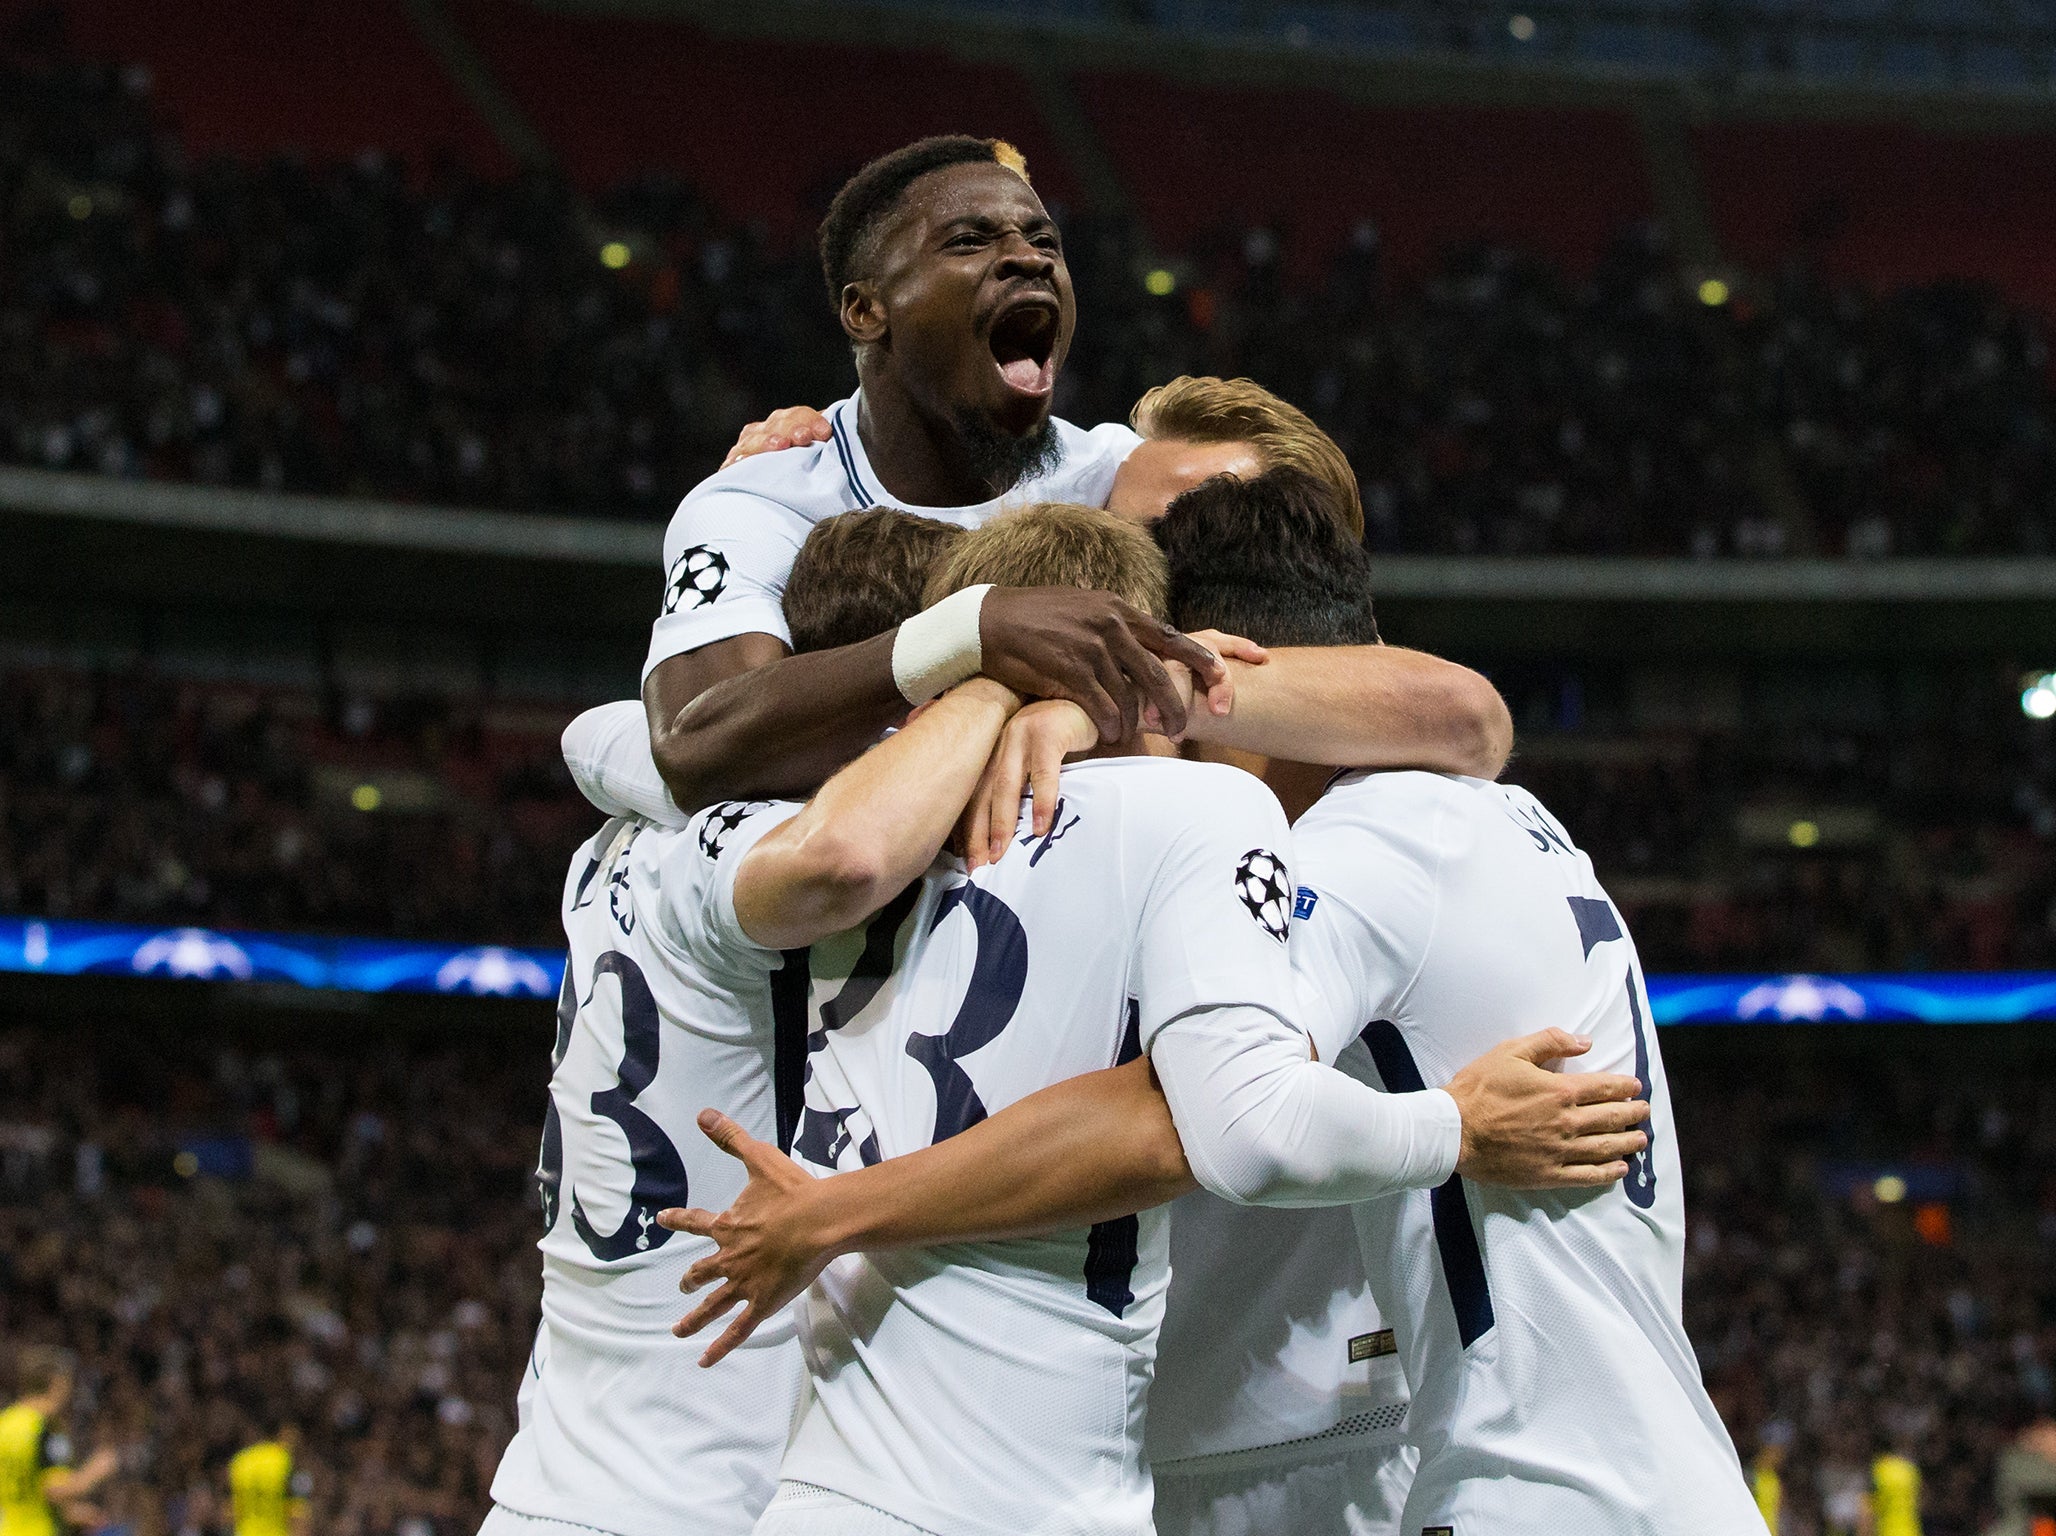 Tottenham began their continental campaign with a fine win